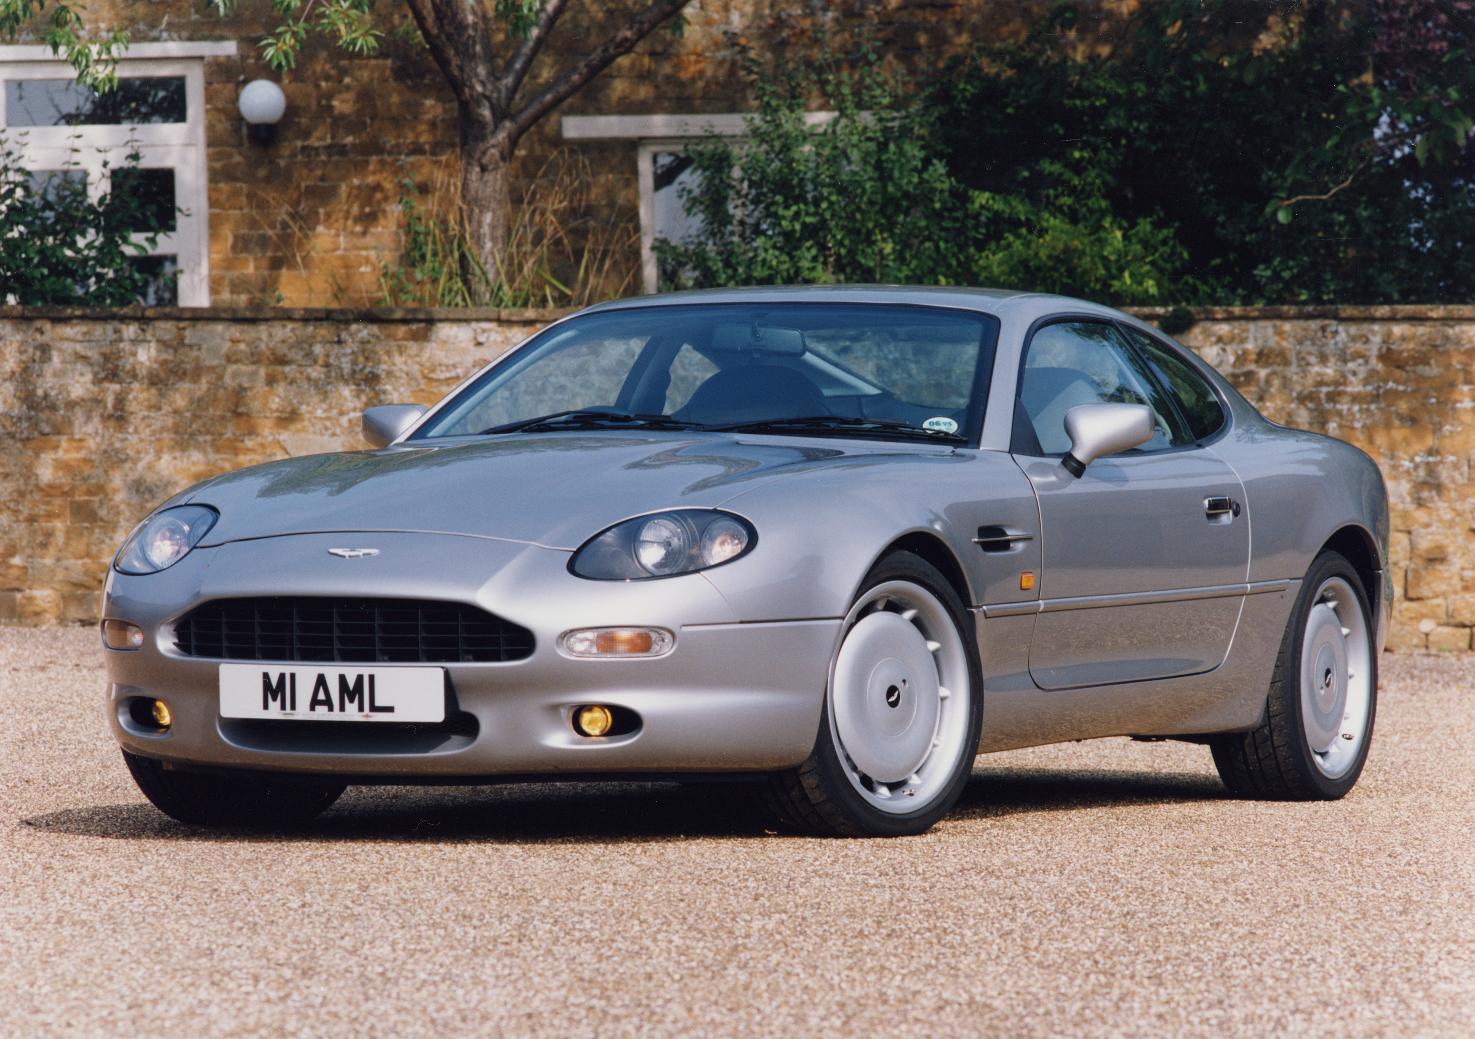 After 30 years of trying, will Aston Martin ever better the DB7?